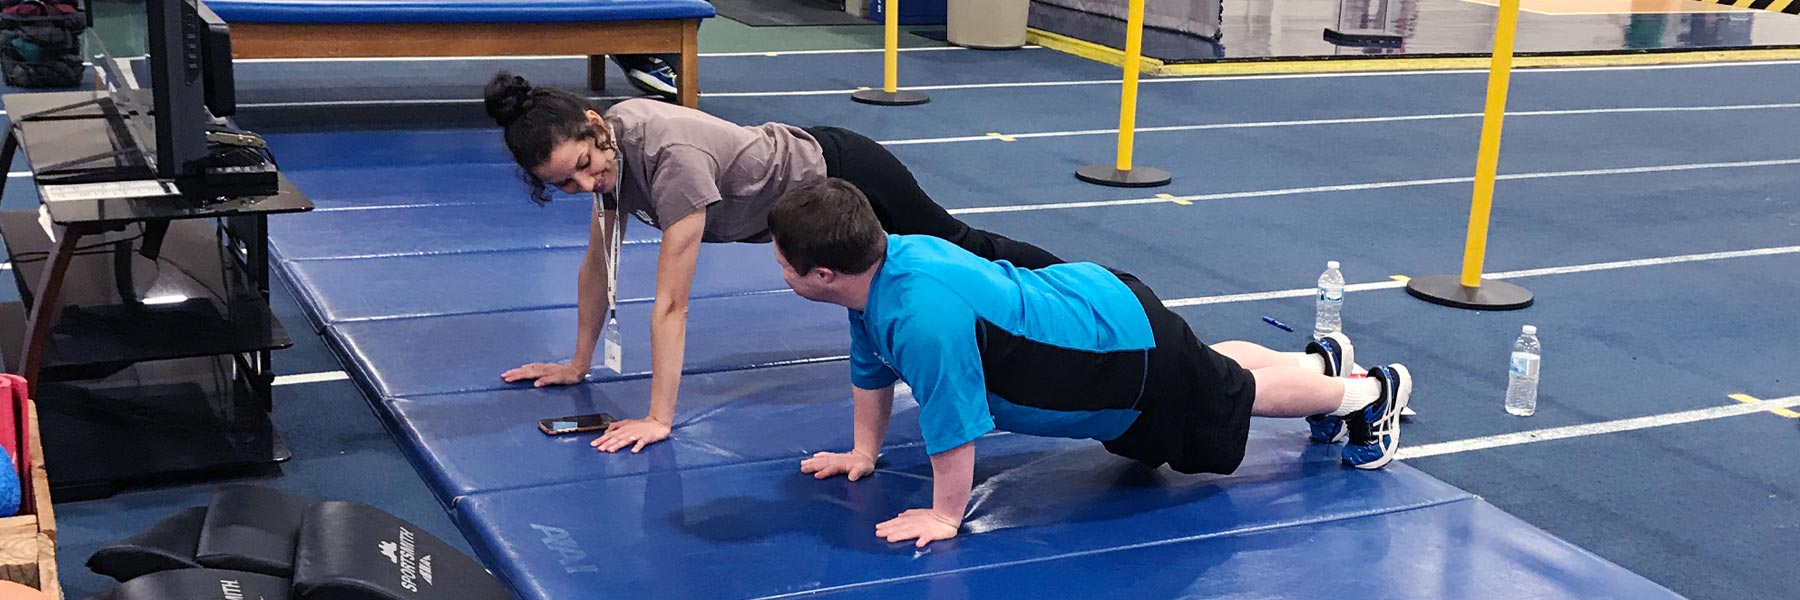 An instructor shows an AMP client how to perform a pushup.